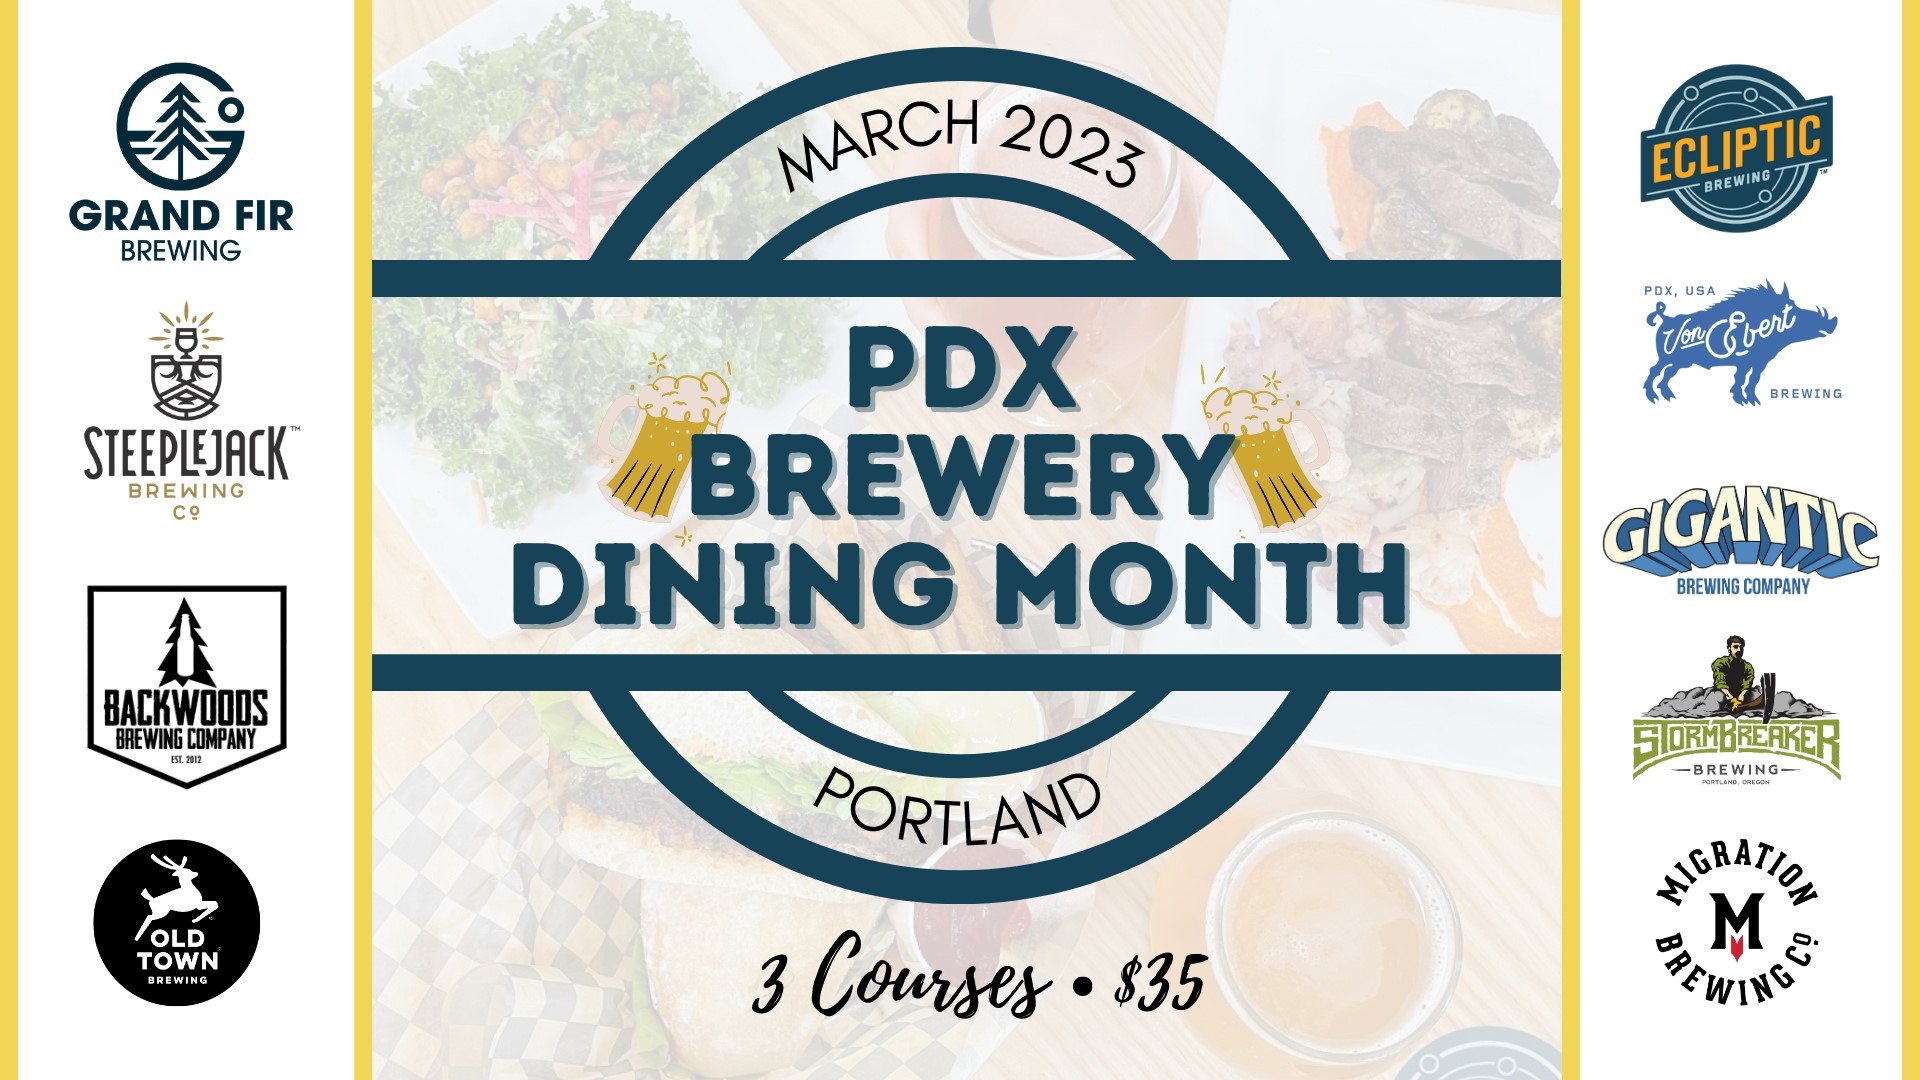 Inspired by Travel Portland Dining Month, this new endeavor follows a similar model: special three-course menu for $35 a head.